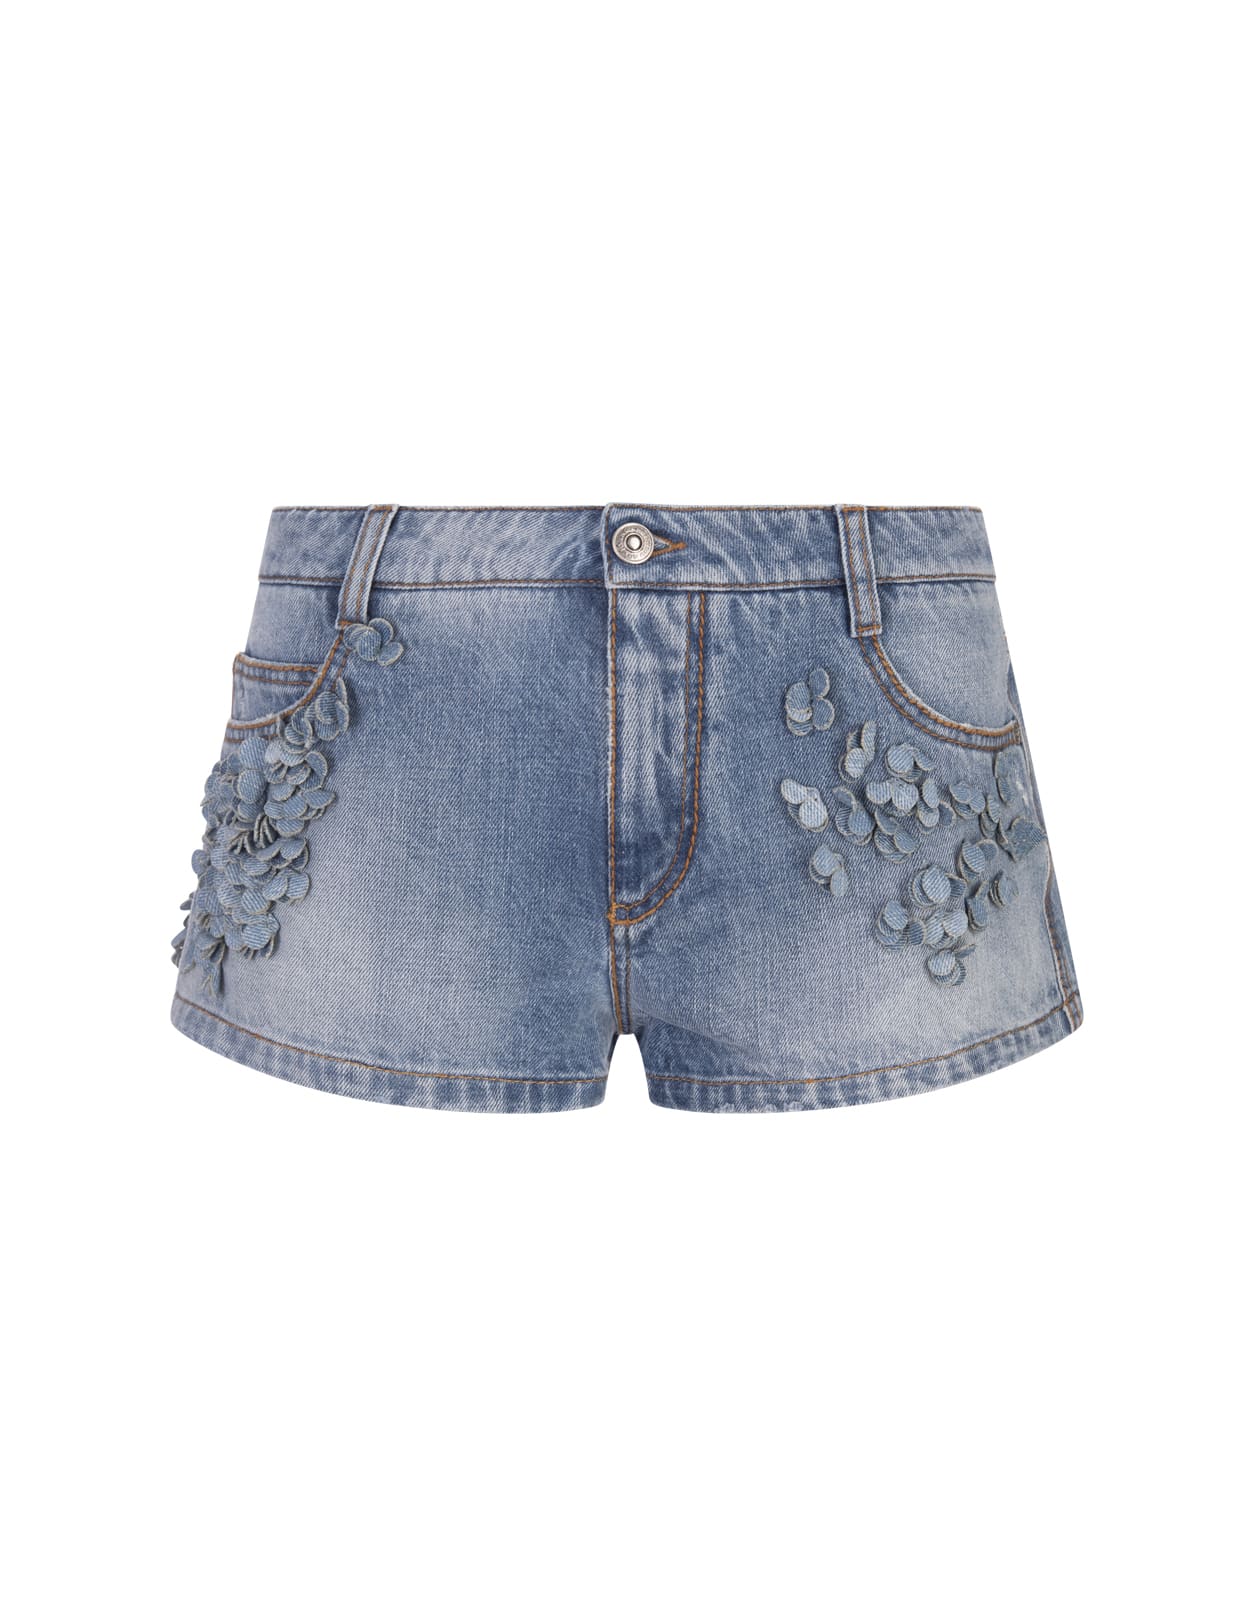 Blue Denim Shorts With Hand Embroidery